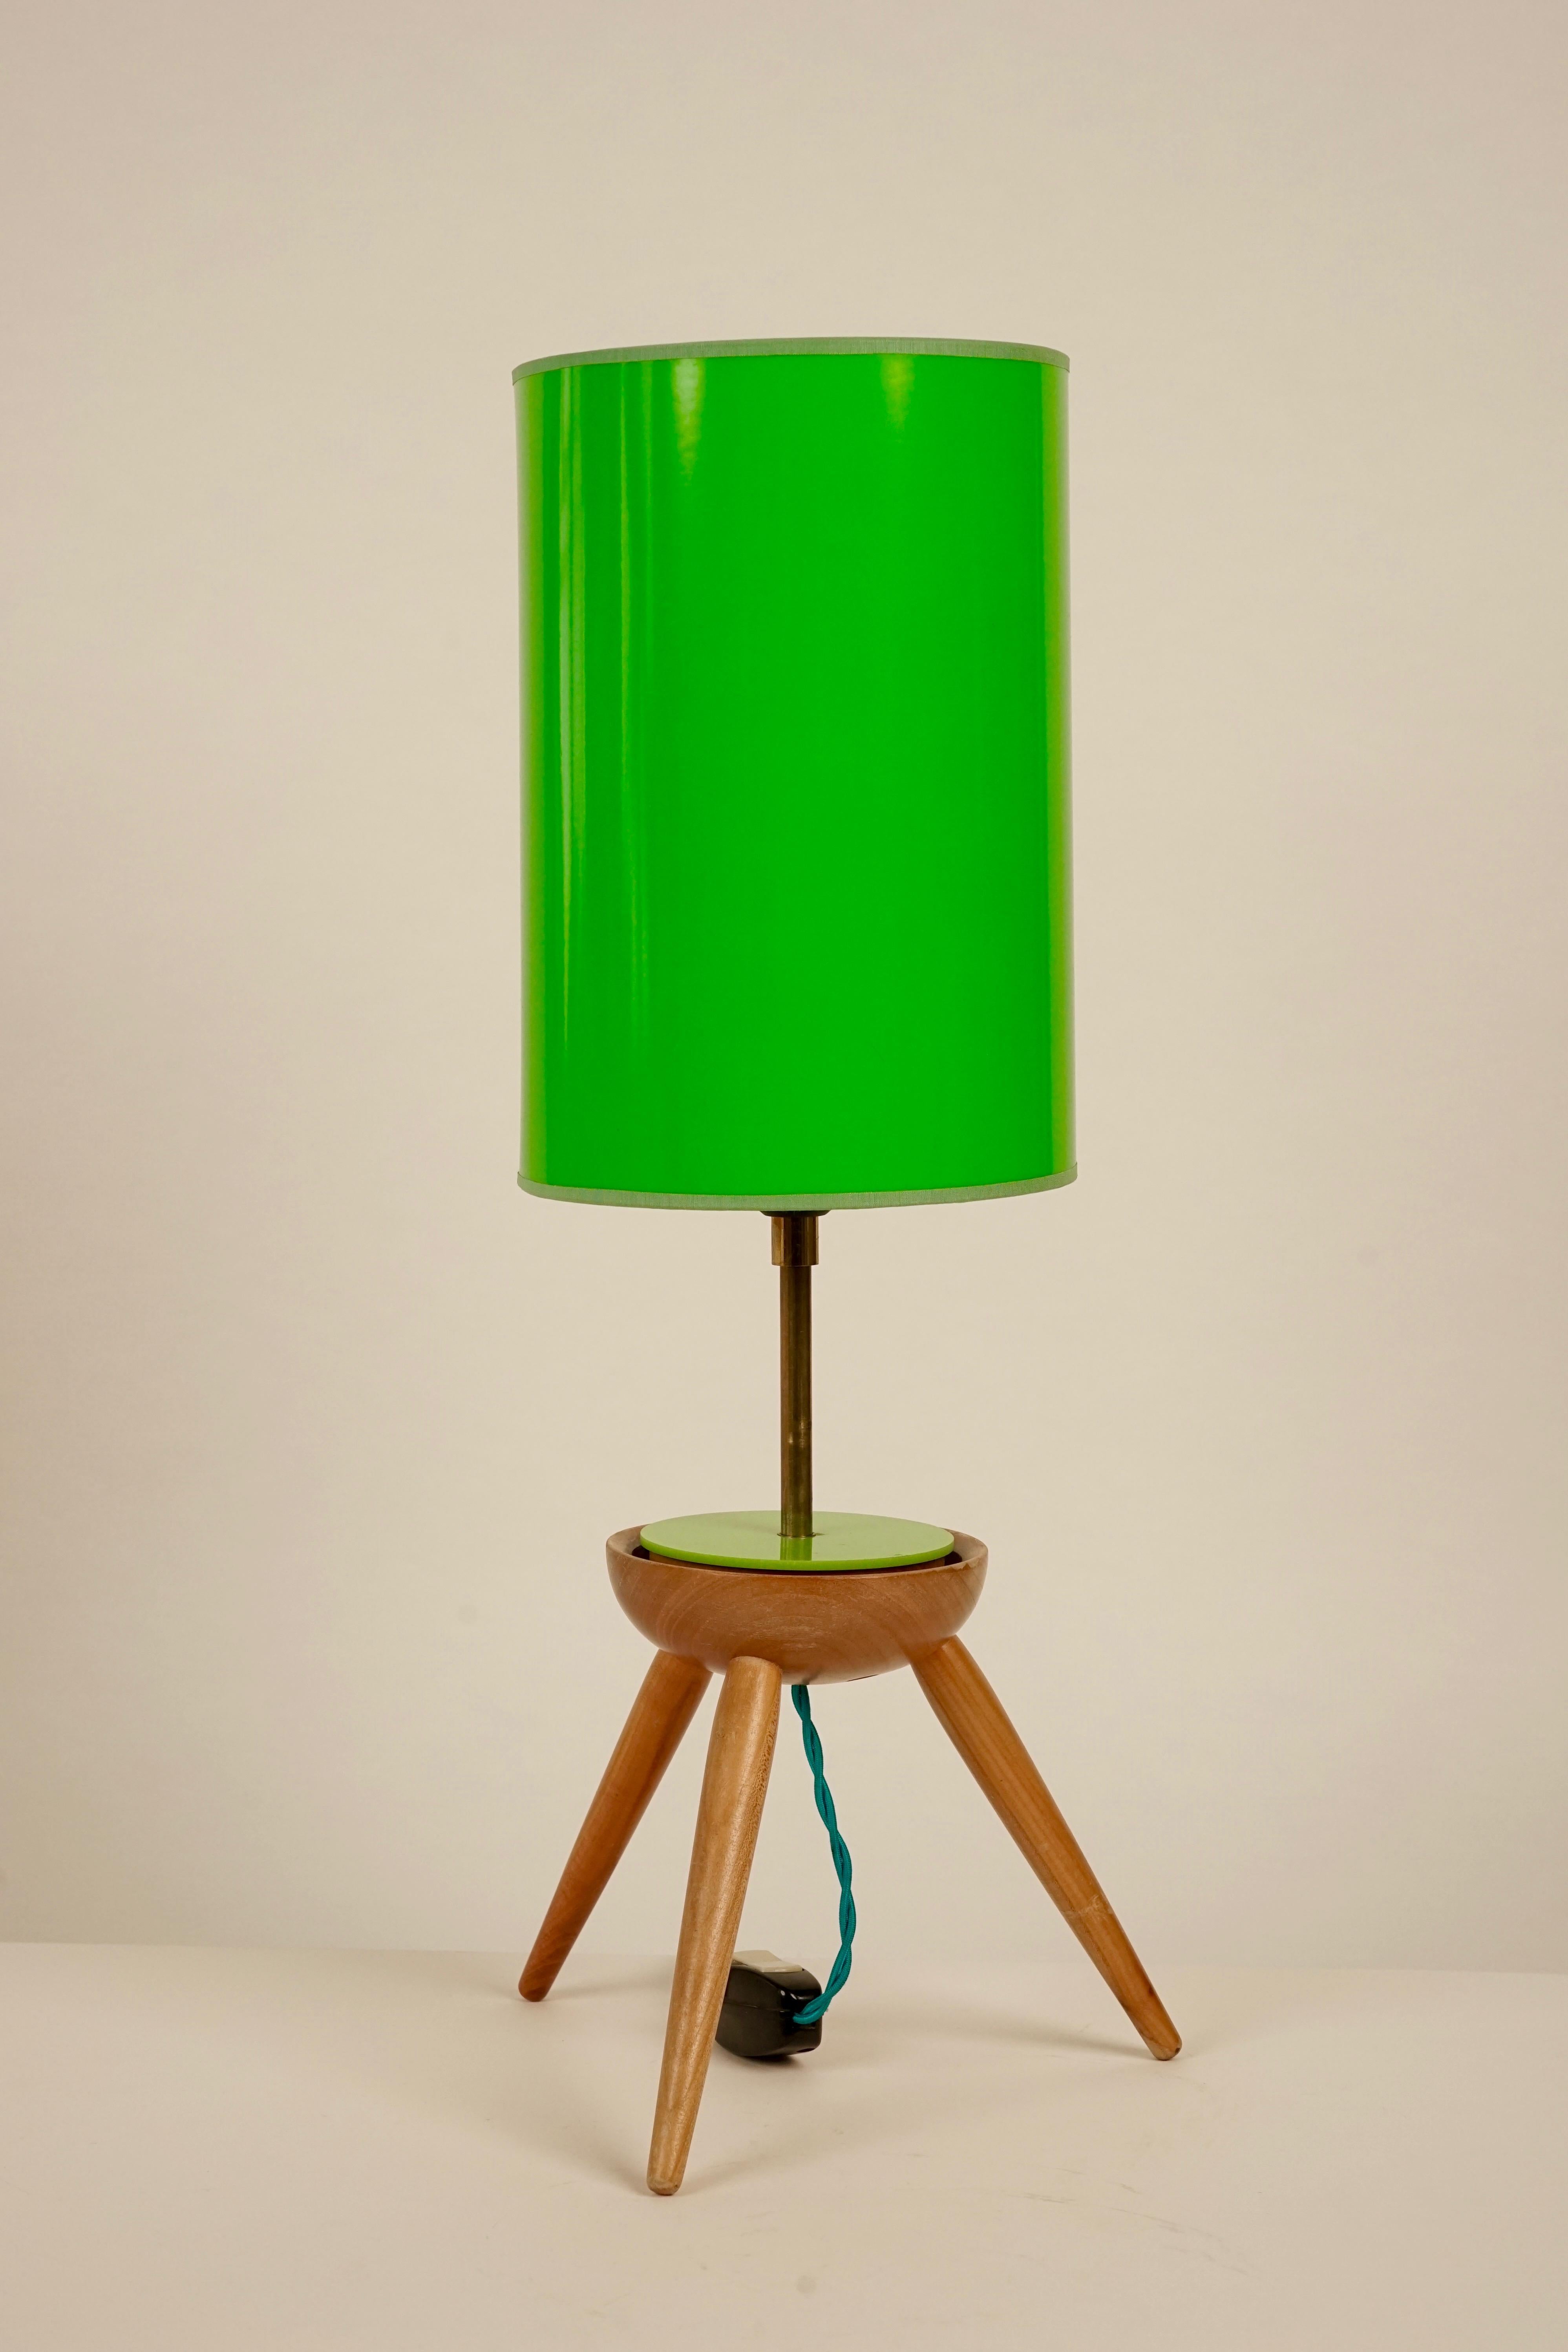 This beautiful midcentury table lamp from Czechoslovakia was designed for the company Krasna jizba and is composed of wood and plastic.
The shade is new, but matches the original. It comes with a twisted cloth cord.